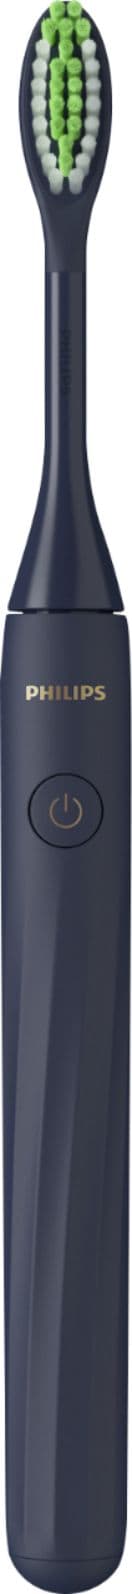 Philips Sonicare - Philips One by Sonicare Battery Toothbrush - Midnight Navy Blue_1